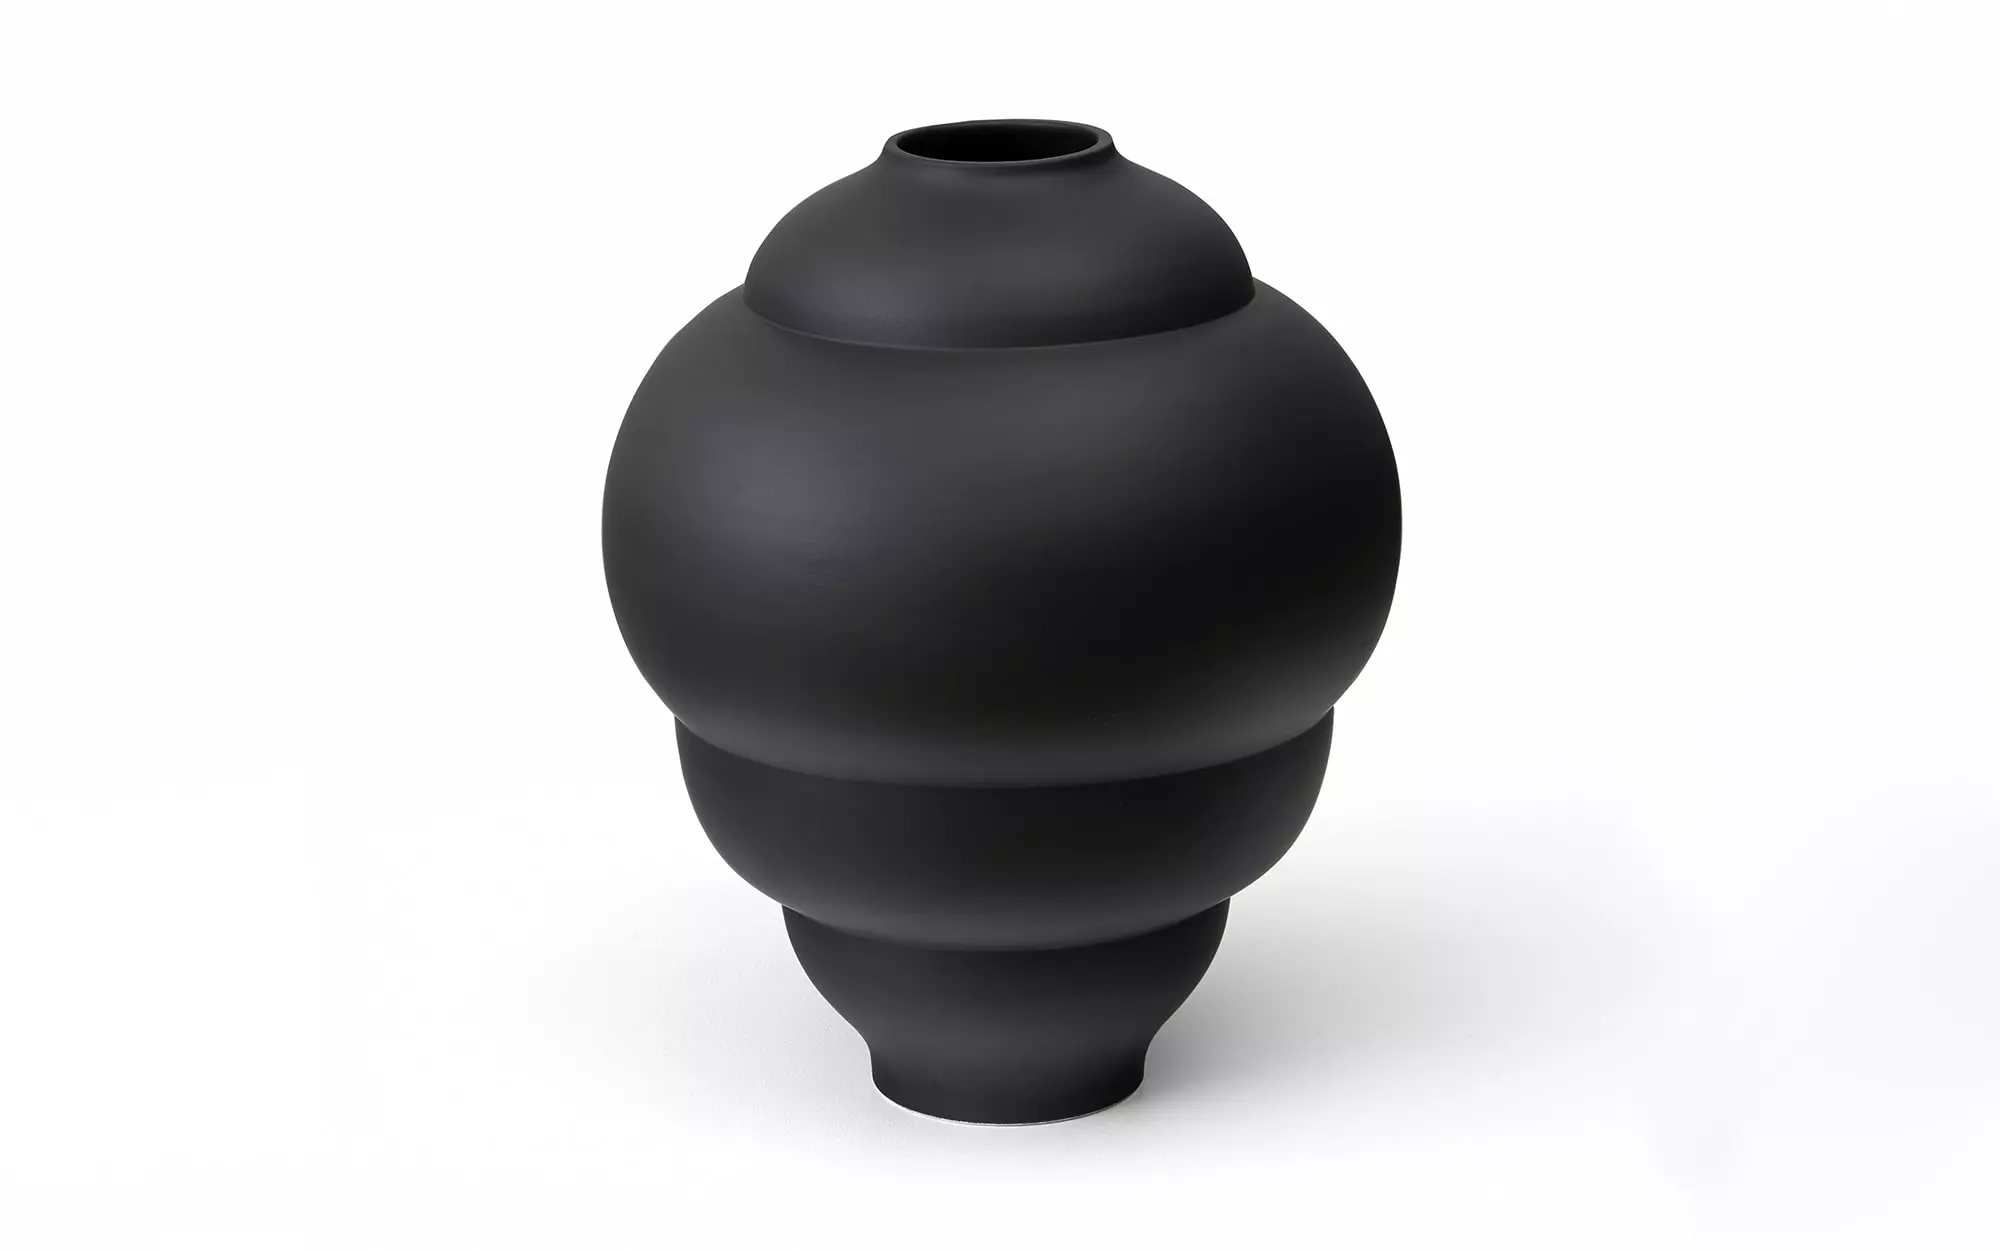 Plump - 3 Vase - Pierre Charpin - @home new chapter.